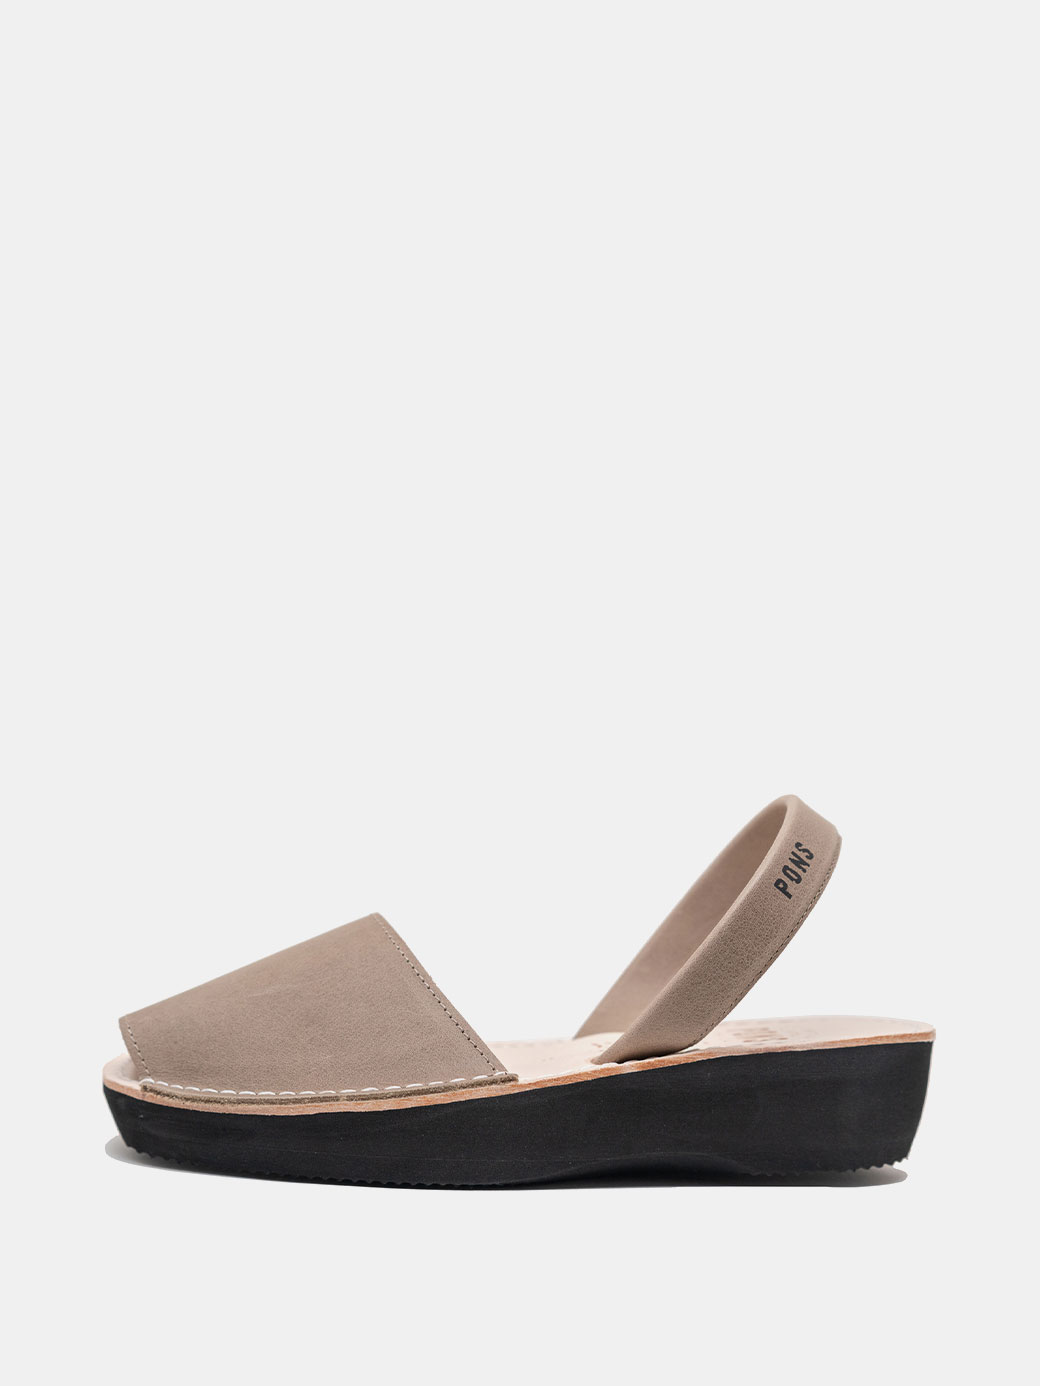 Classic Taupe Platform Pons Shoes front